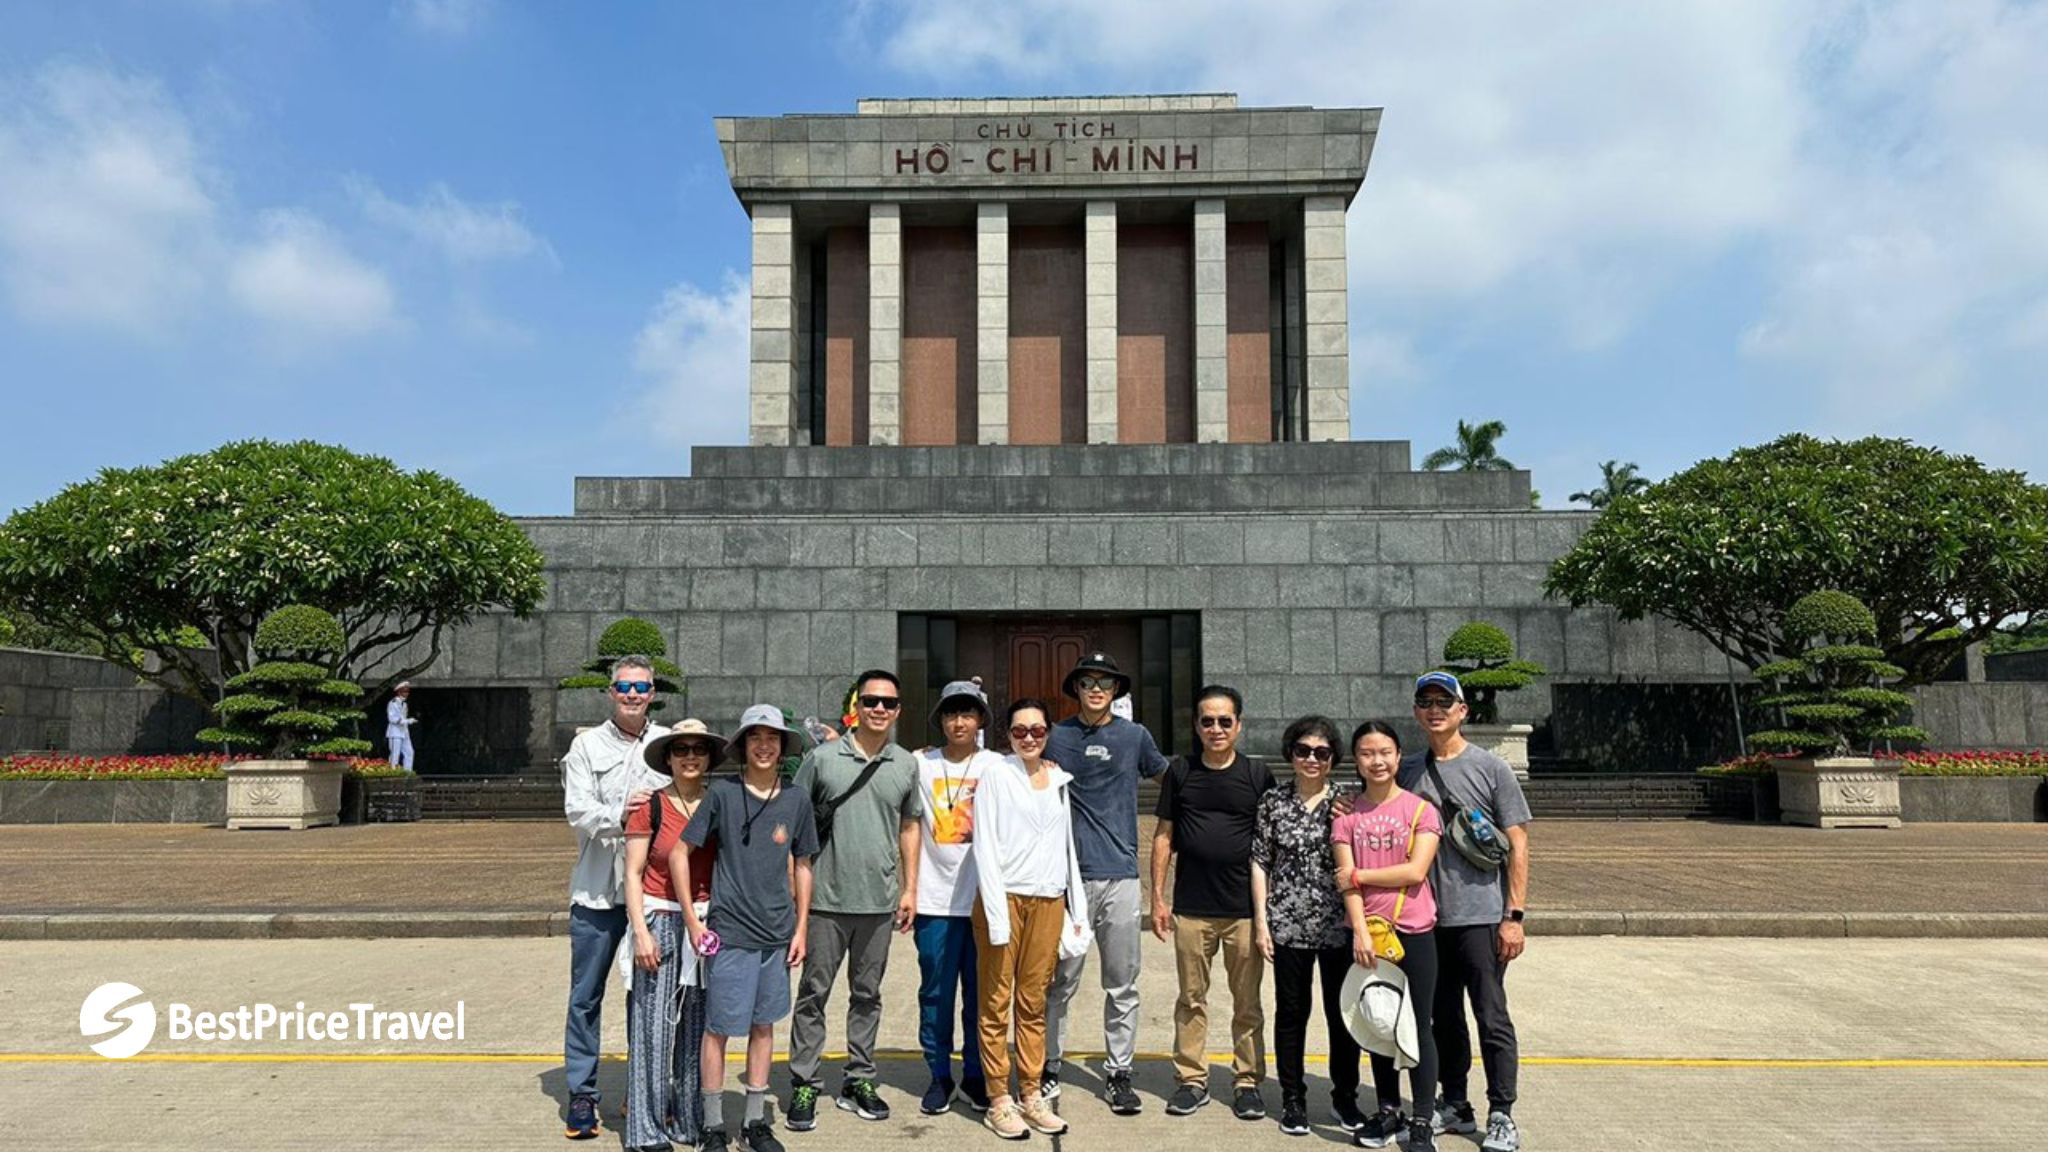 Day 2 Pay A Visit To The Ho Chi Minh Mausoleum